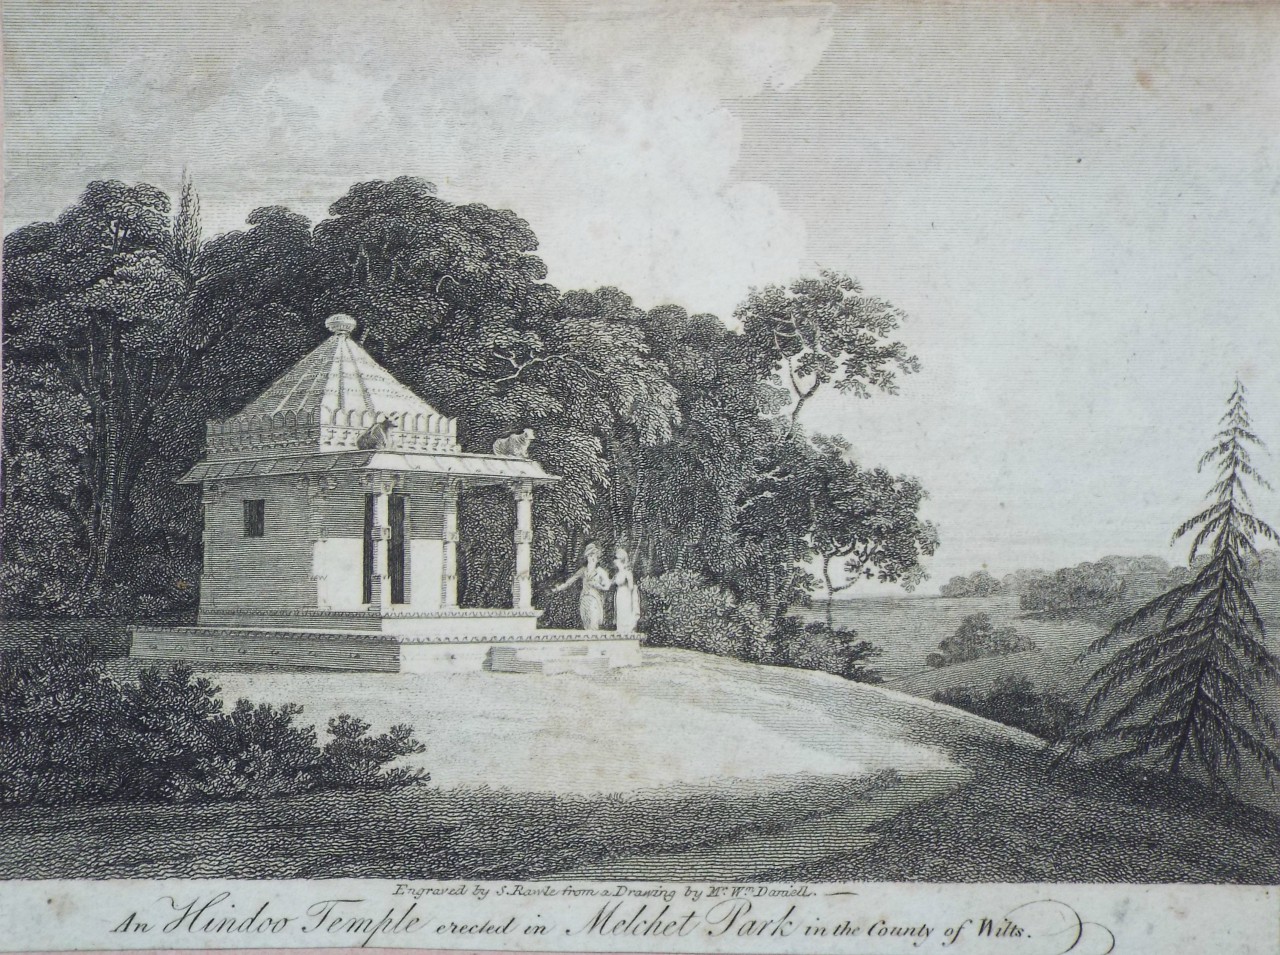 Print - An Hindoo Temple erected in Melchet Park in the County of Wilts - Rowle